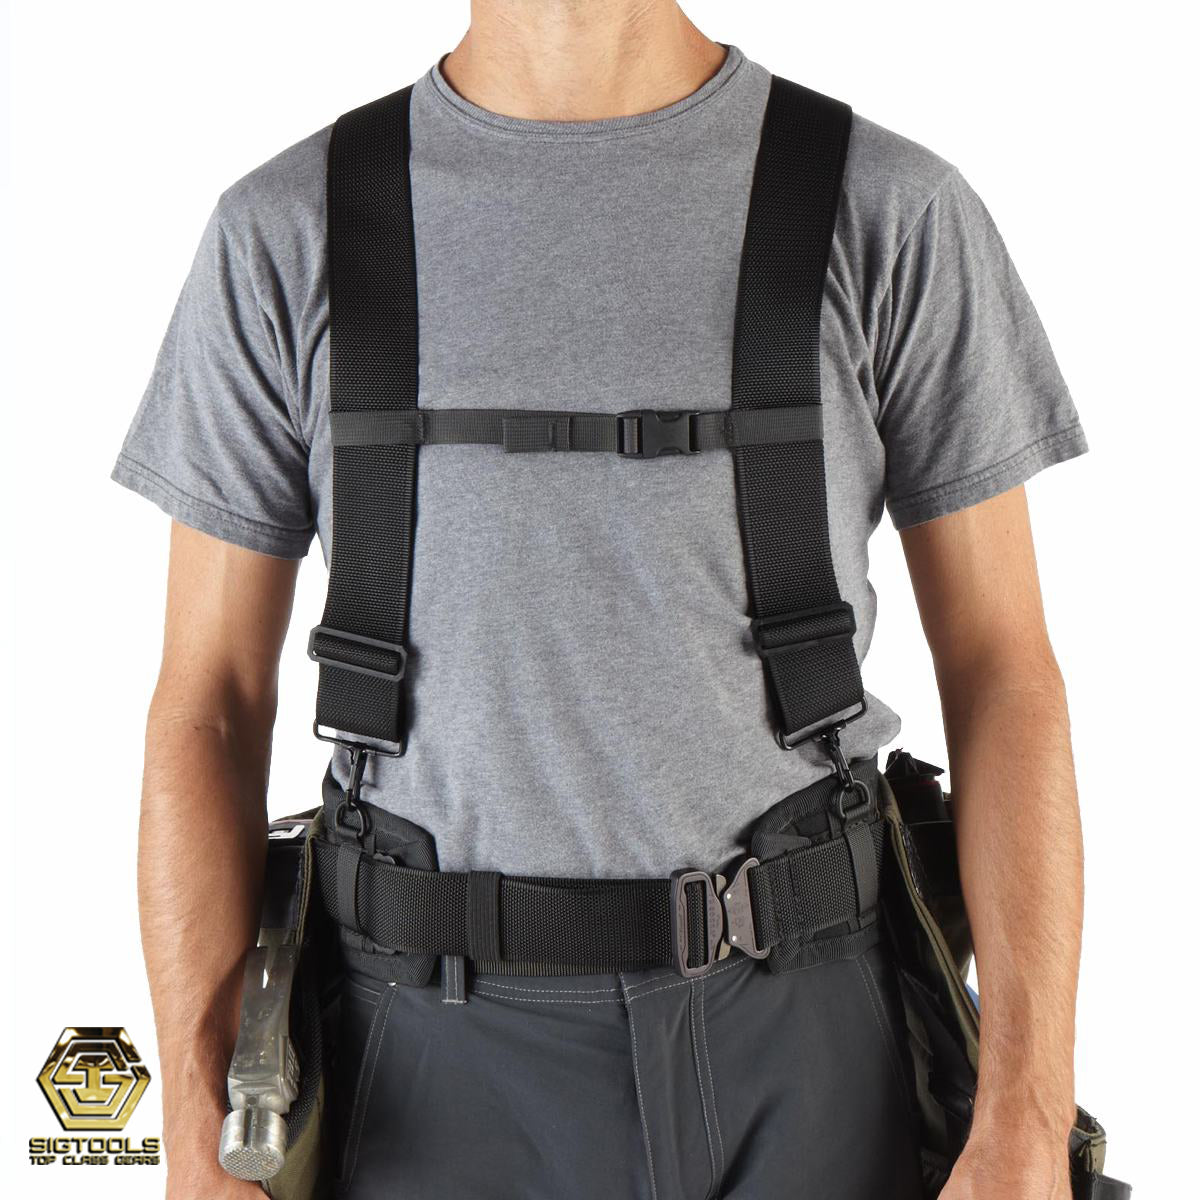 "Diamondback Basic Suspenders - Reliable Support for Your Work Gear- front view"